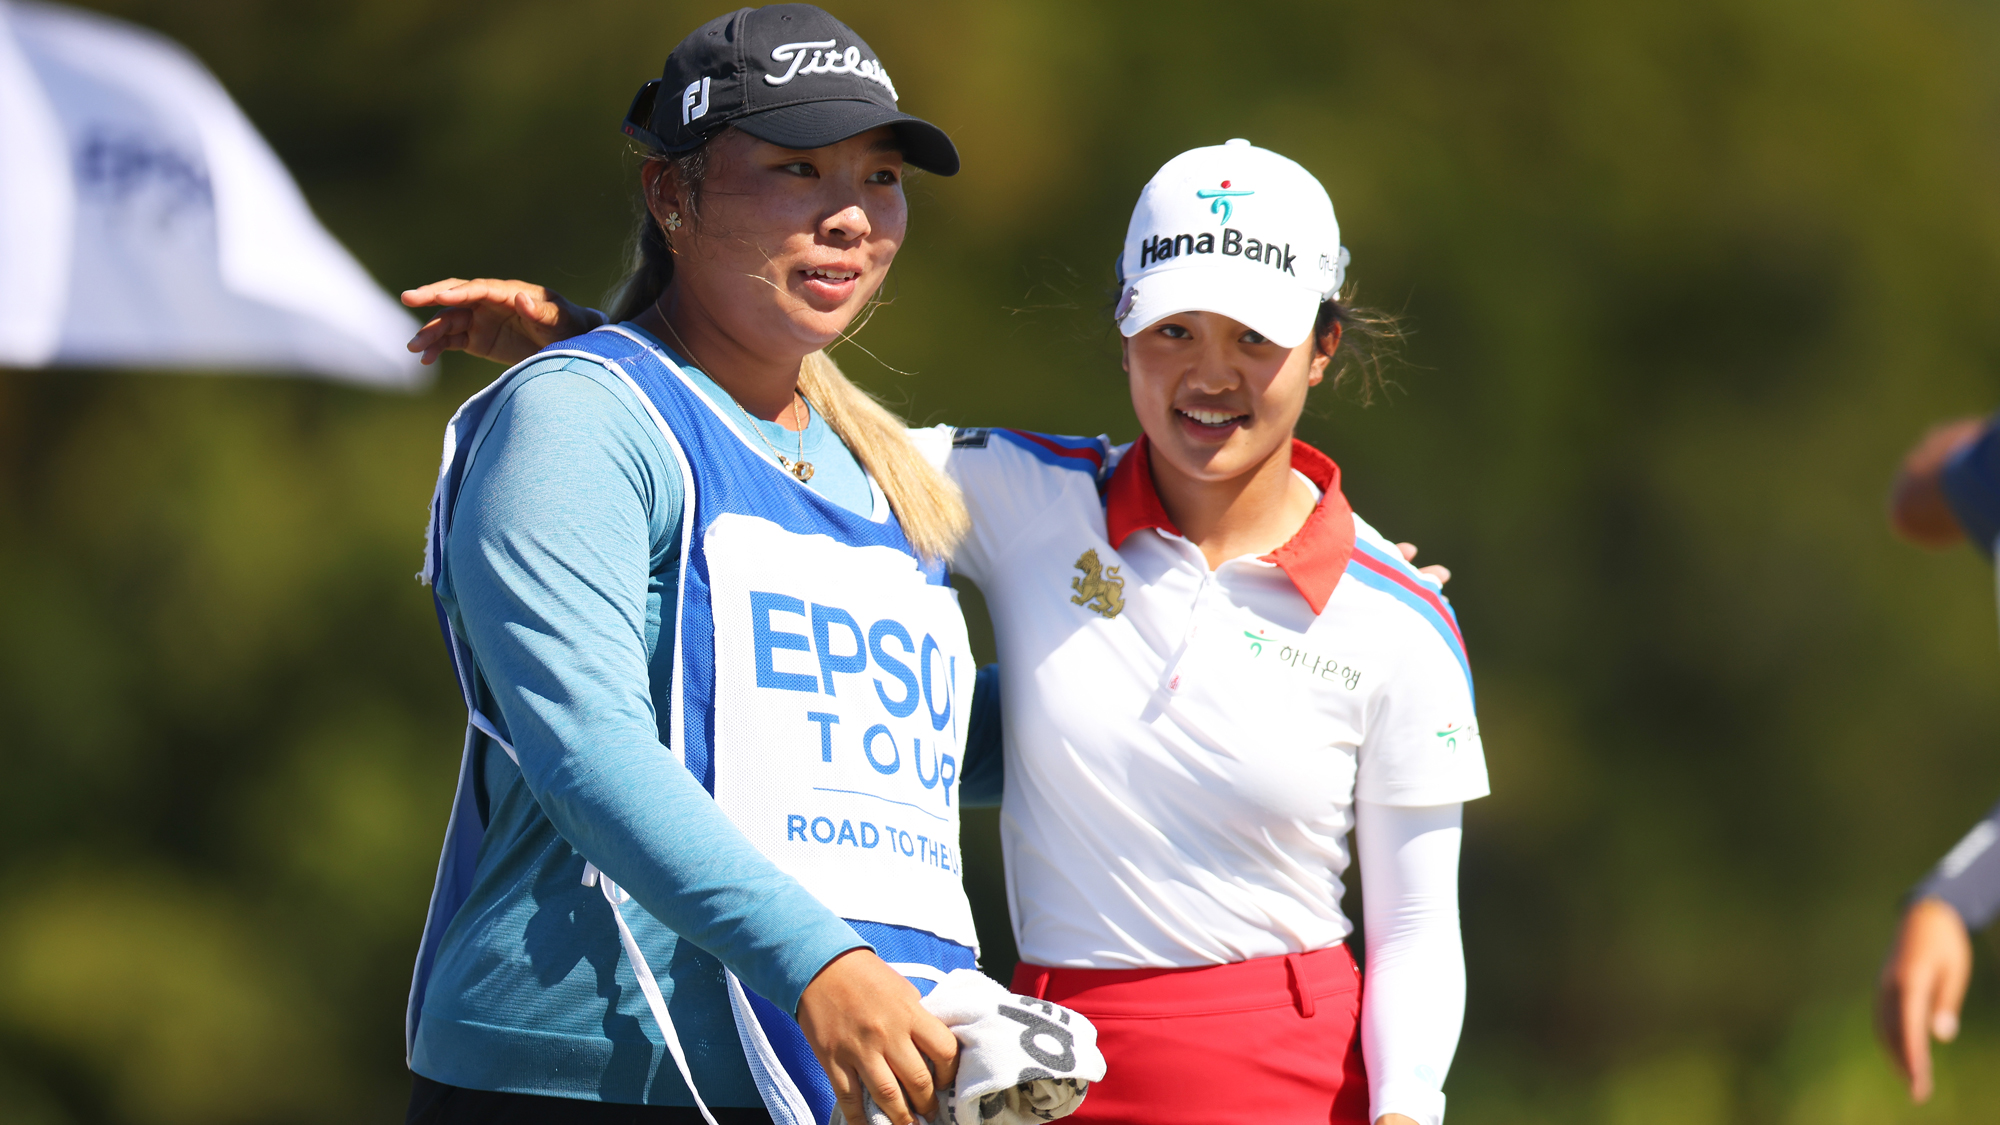 Jaravee Boonchant during the third round of the Epson Tour Championship